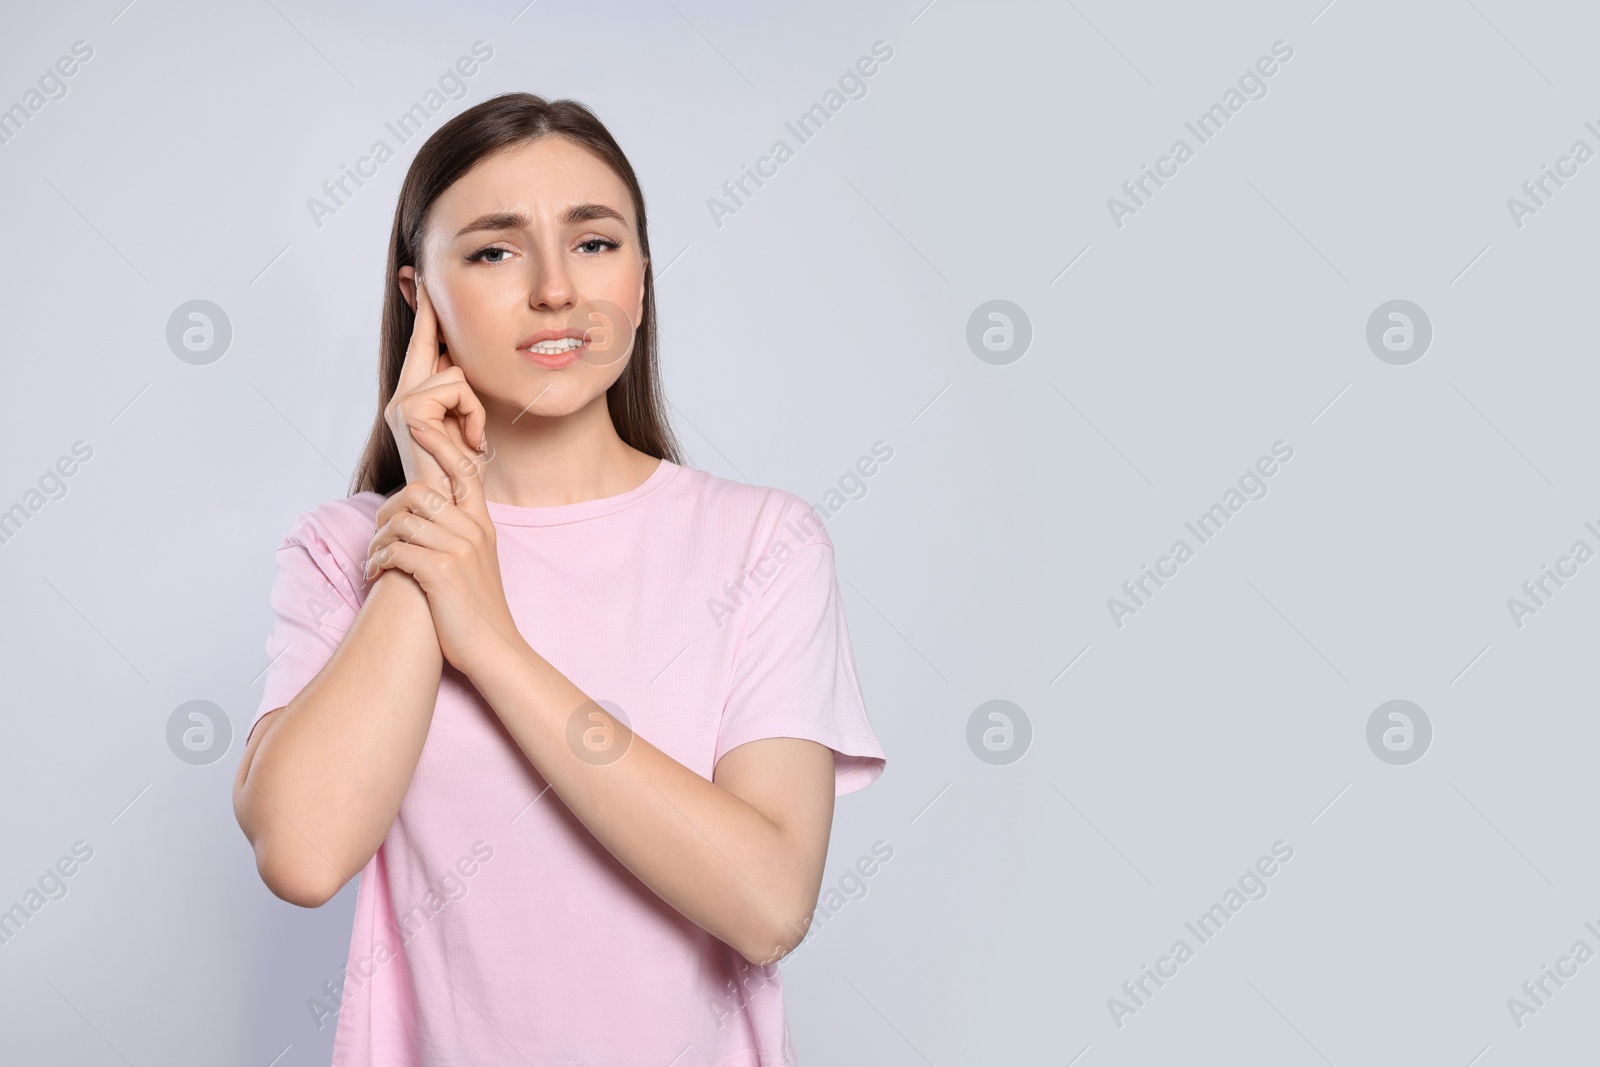 Photo of Young woman suffering from ear pain on light grey background. Space for text